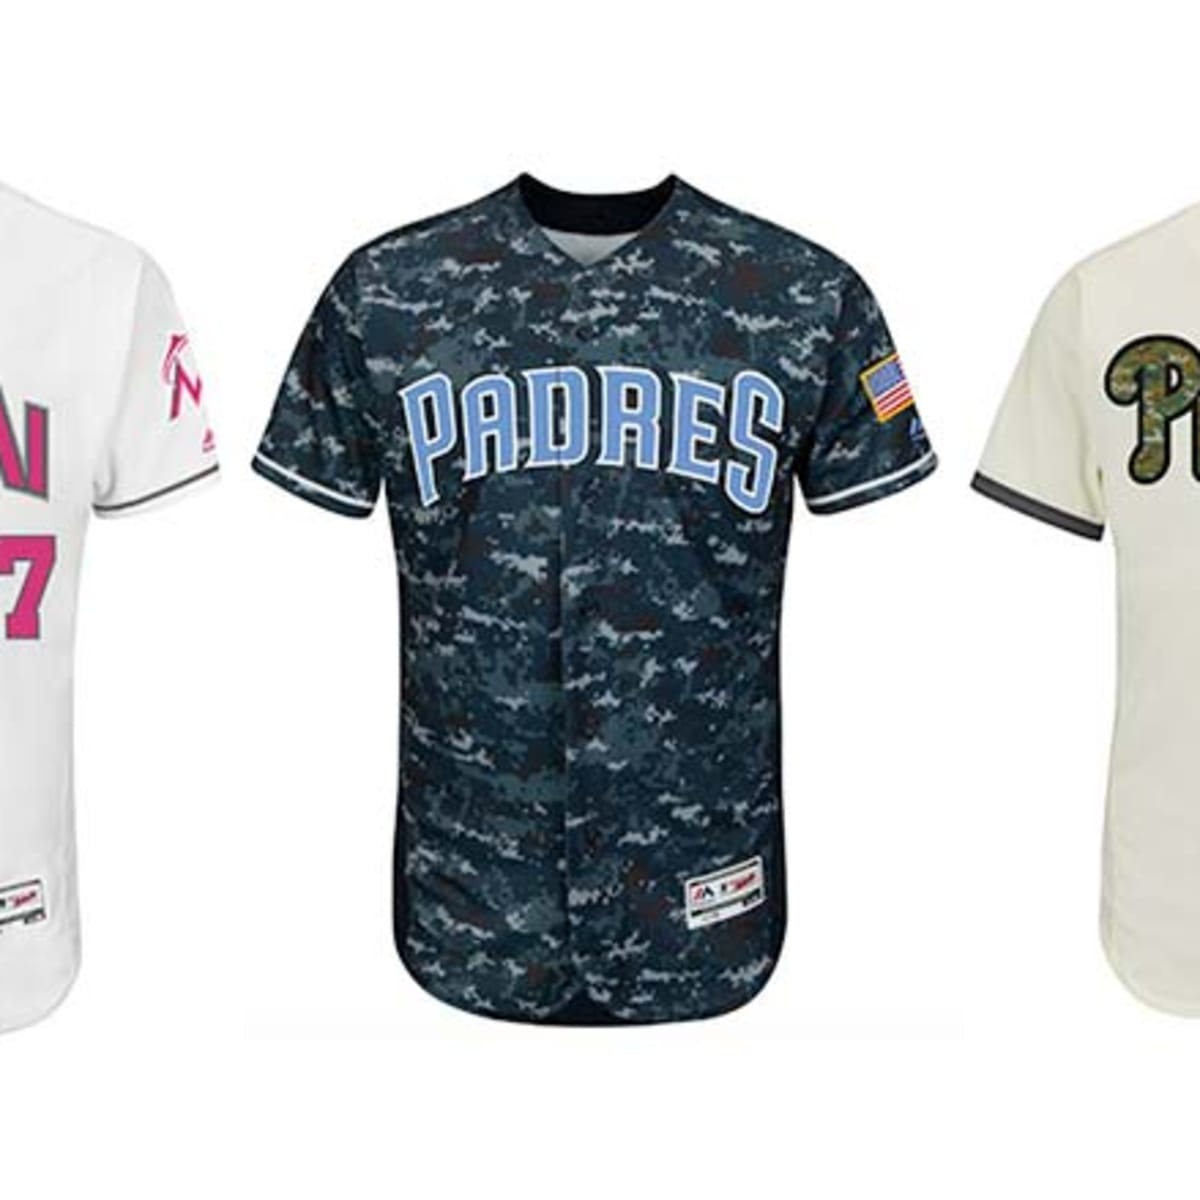 Major League Baseball unveils uniforms for special events this